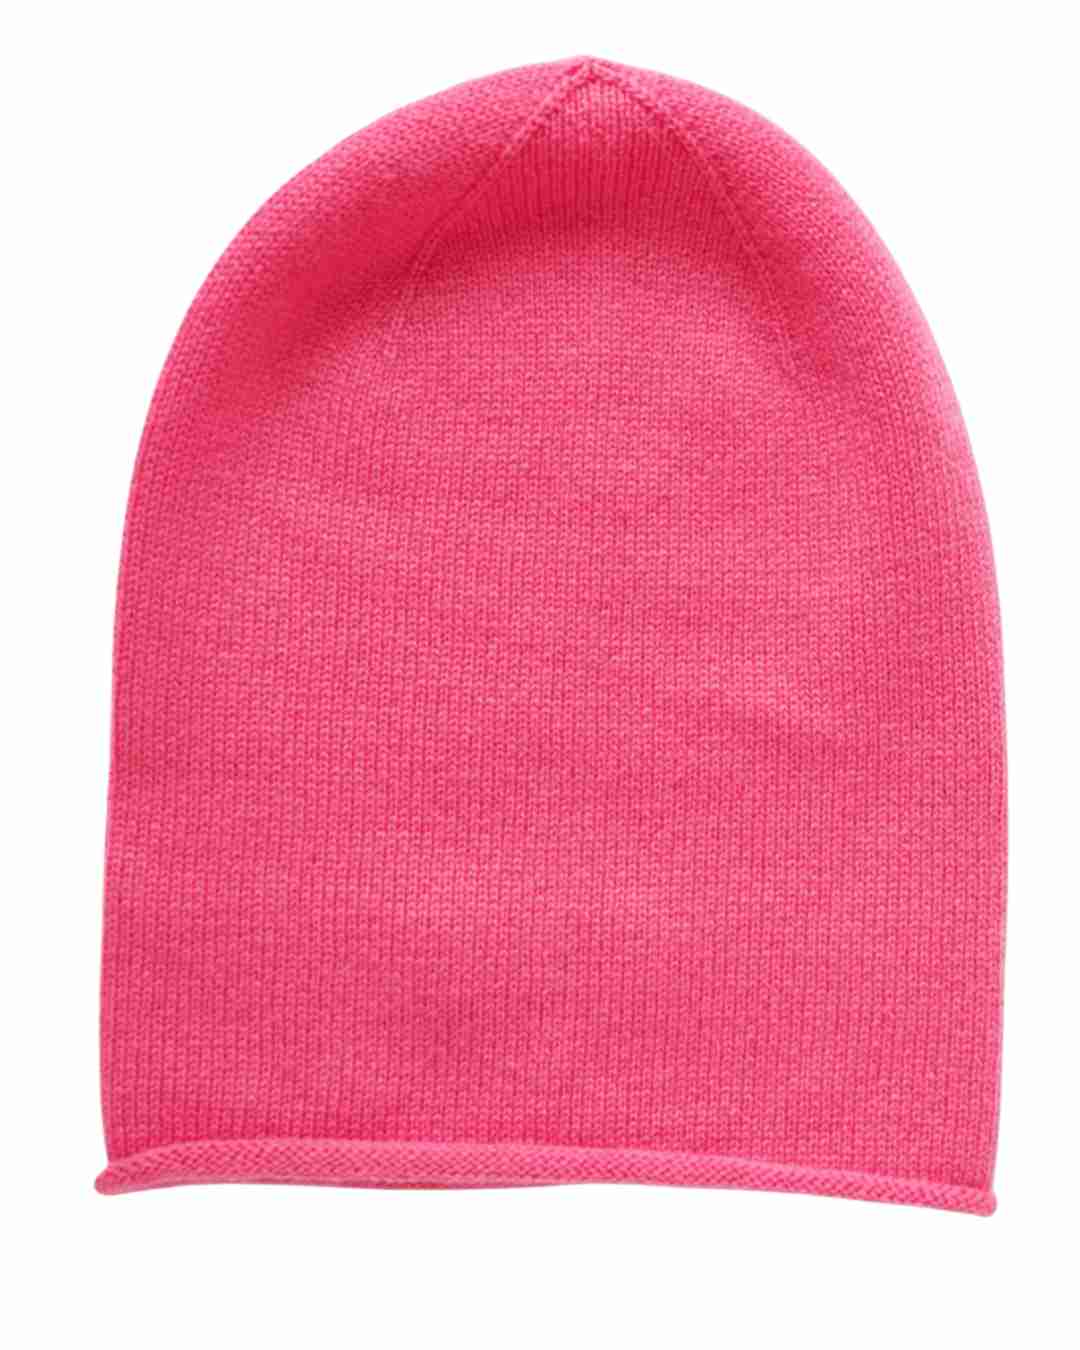 fuschia pink cashmere hat and beanies from Ireland